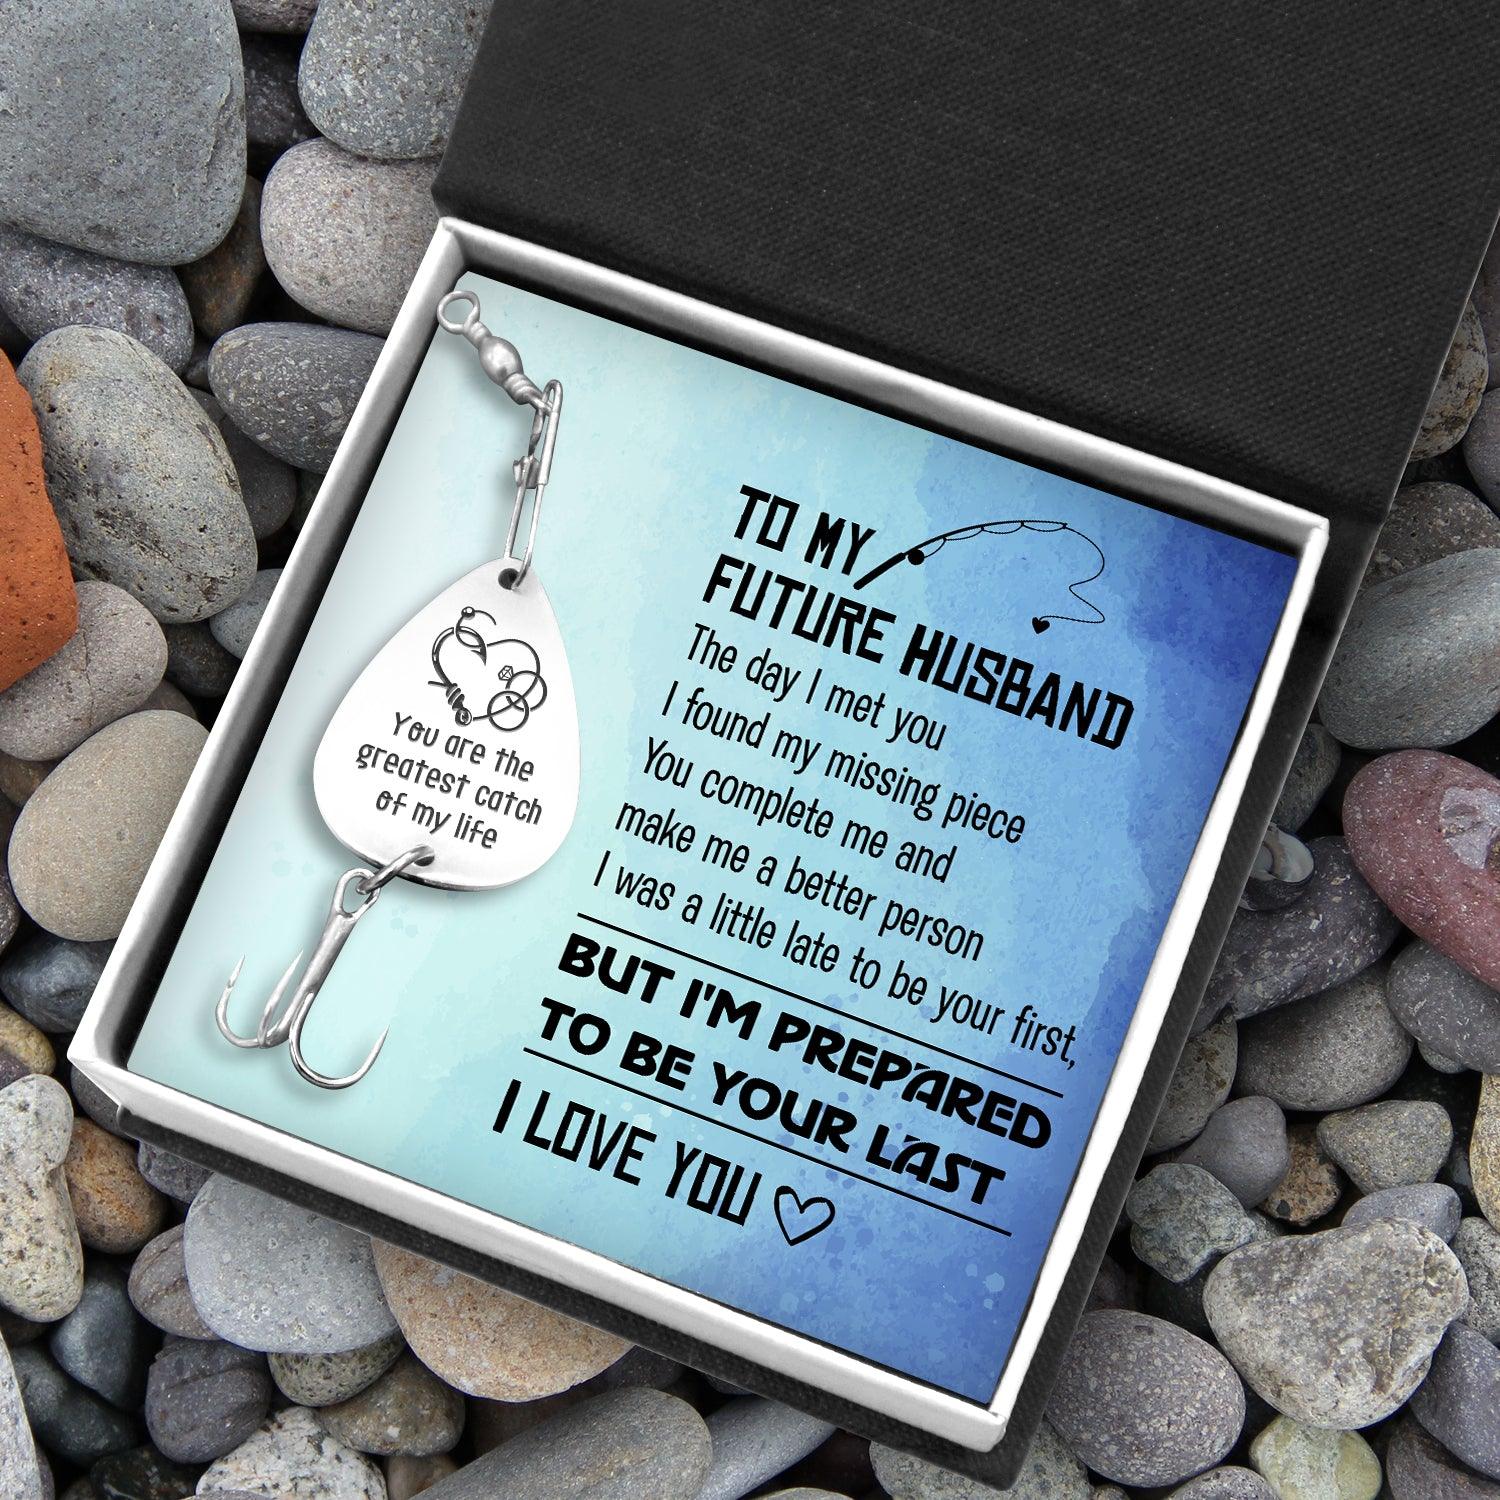 Engraved Fishing Hook - Fishing - To My Future Husband - I'm Prepared To Be Your Last - Augfa24001 - Gifts Holder